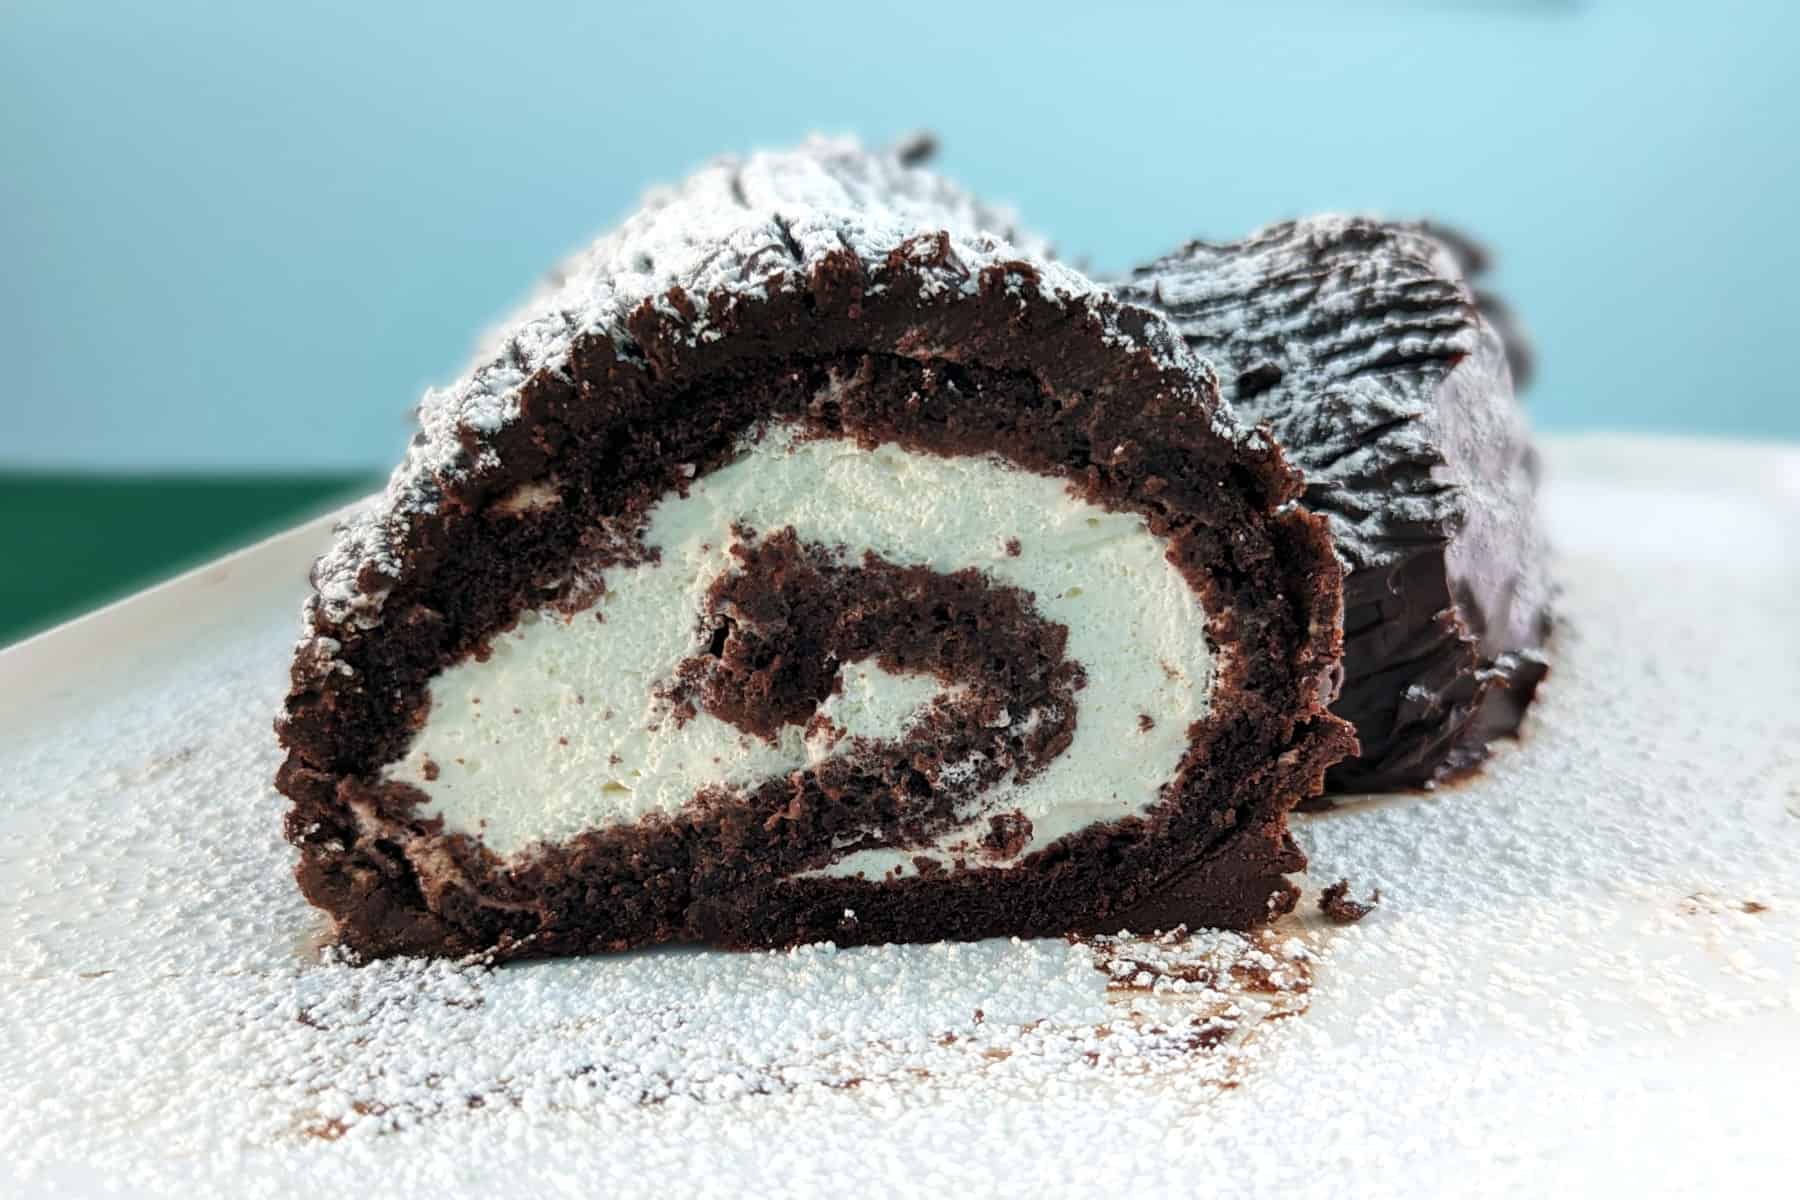 chocolate yule log with a slice missing so you can see the swirl, with powdered sugar snow on top